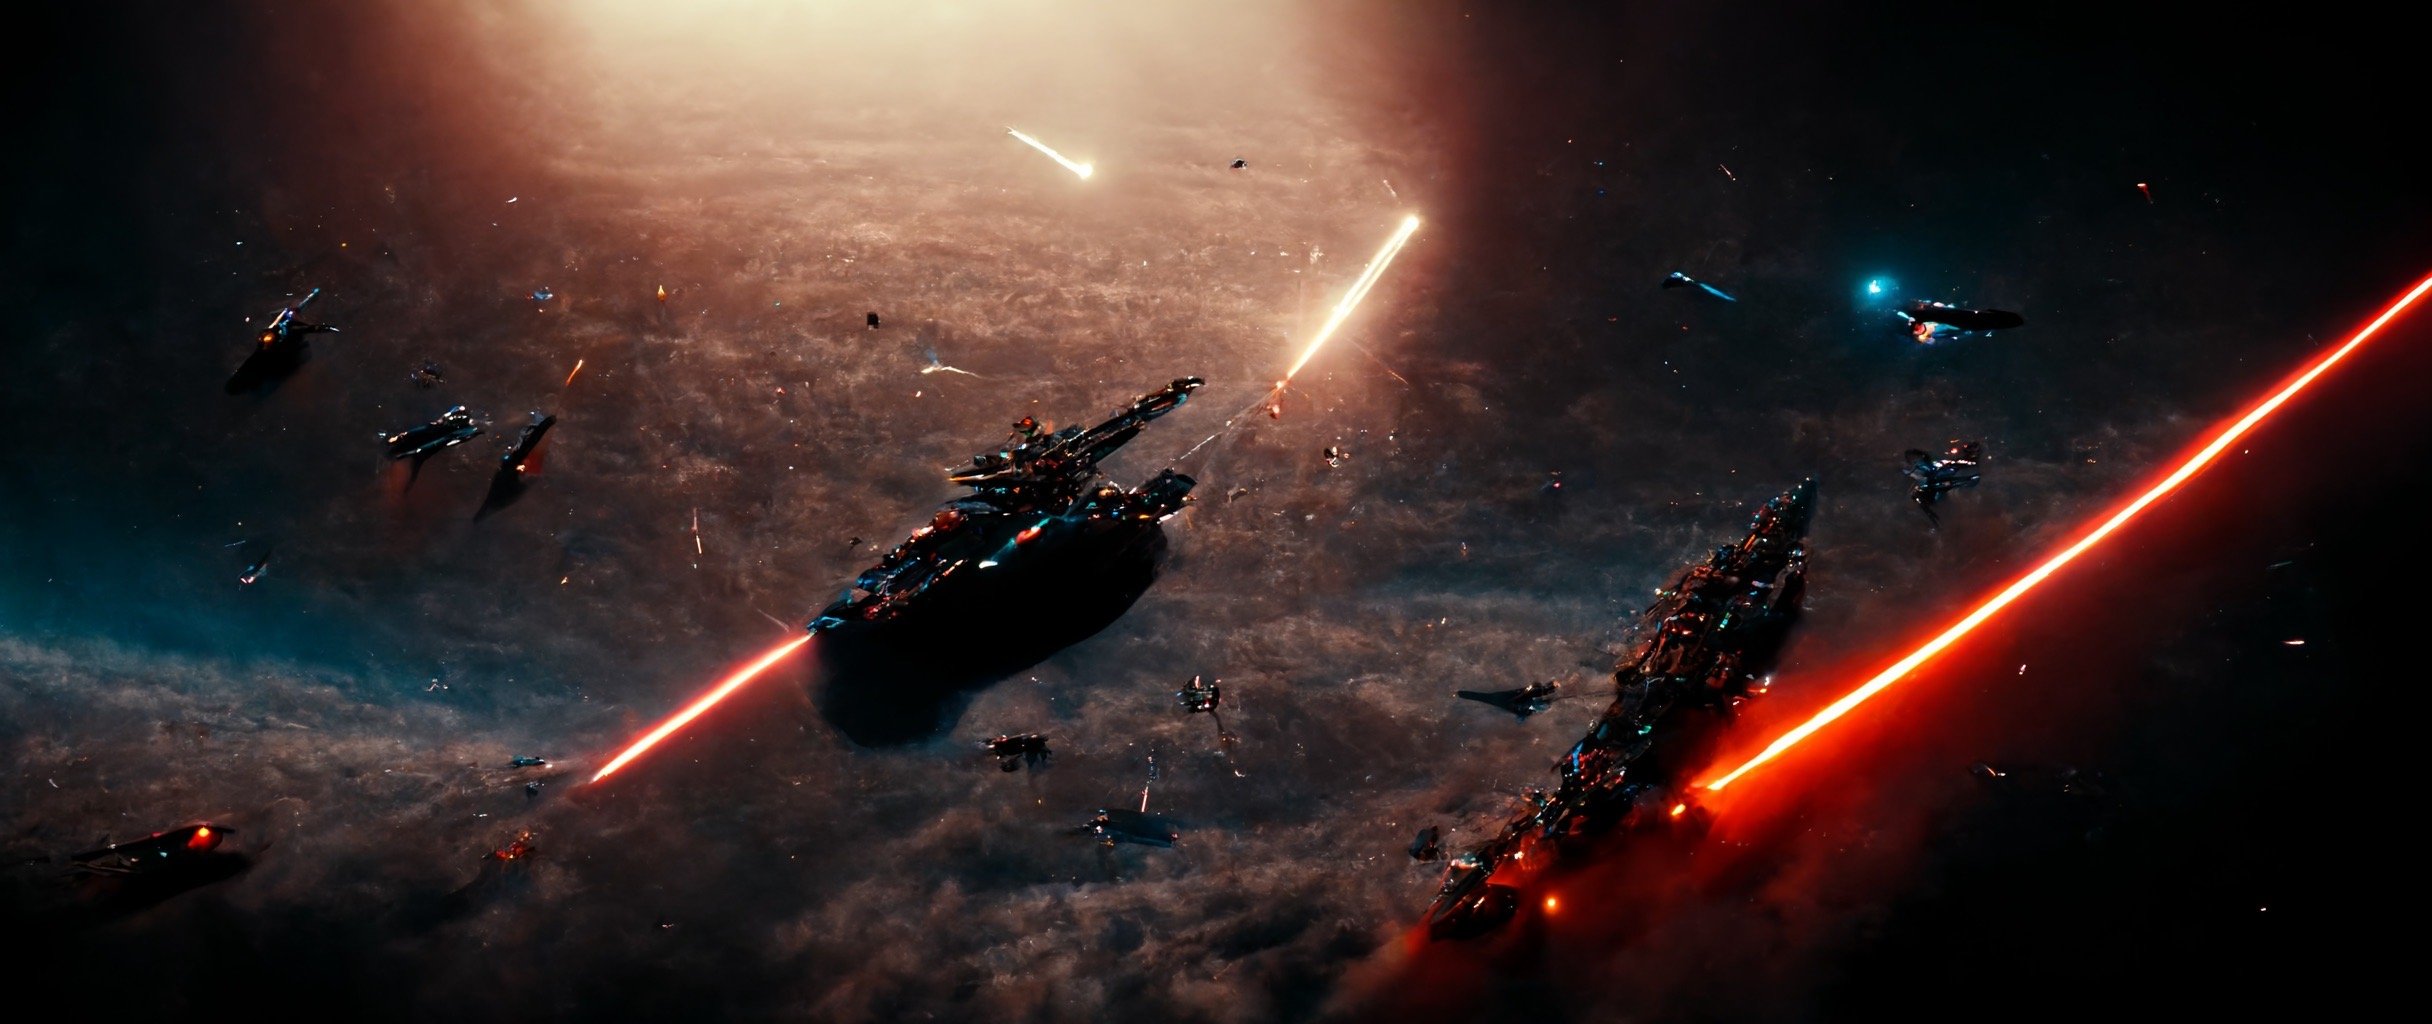 f8e7d02b-40c6-4f80-9b49-c89a36283b64_S3RAPH_Outer_space_battle_with_lots_of_lasers_and_Battlestar_Galactica_large_space_ships_and_a_brilliant_st.JPG